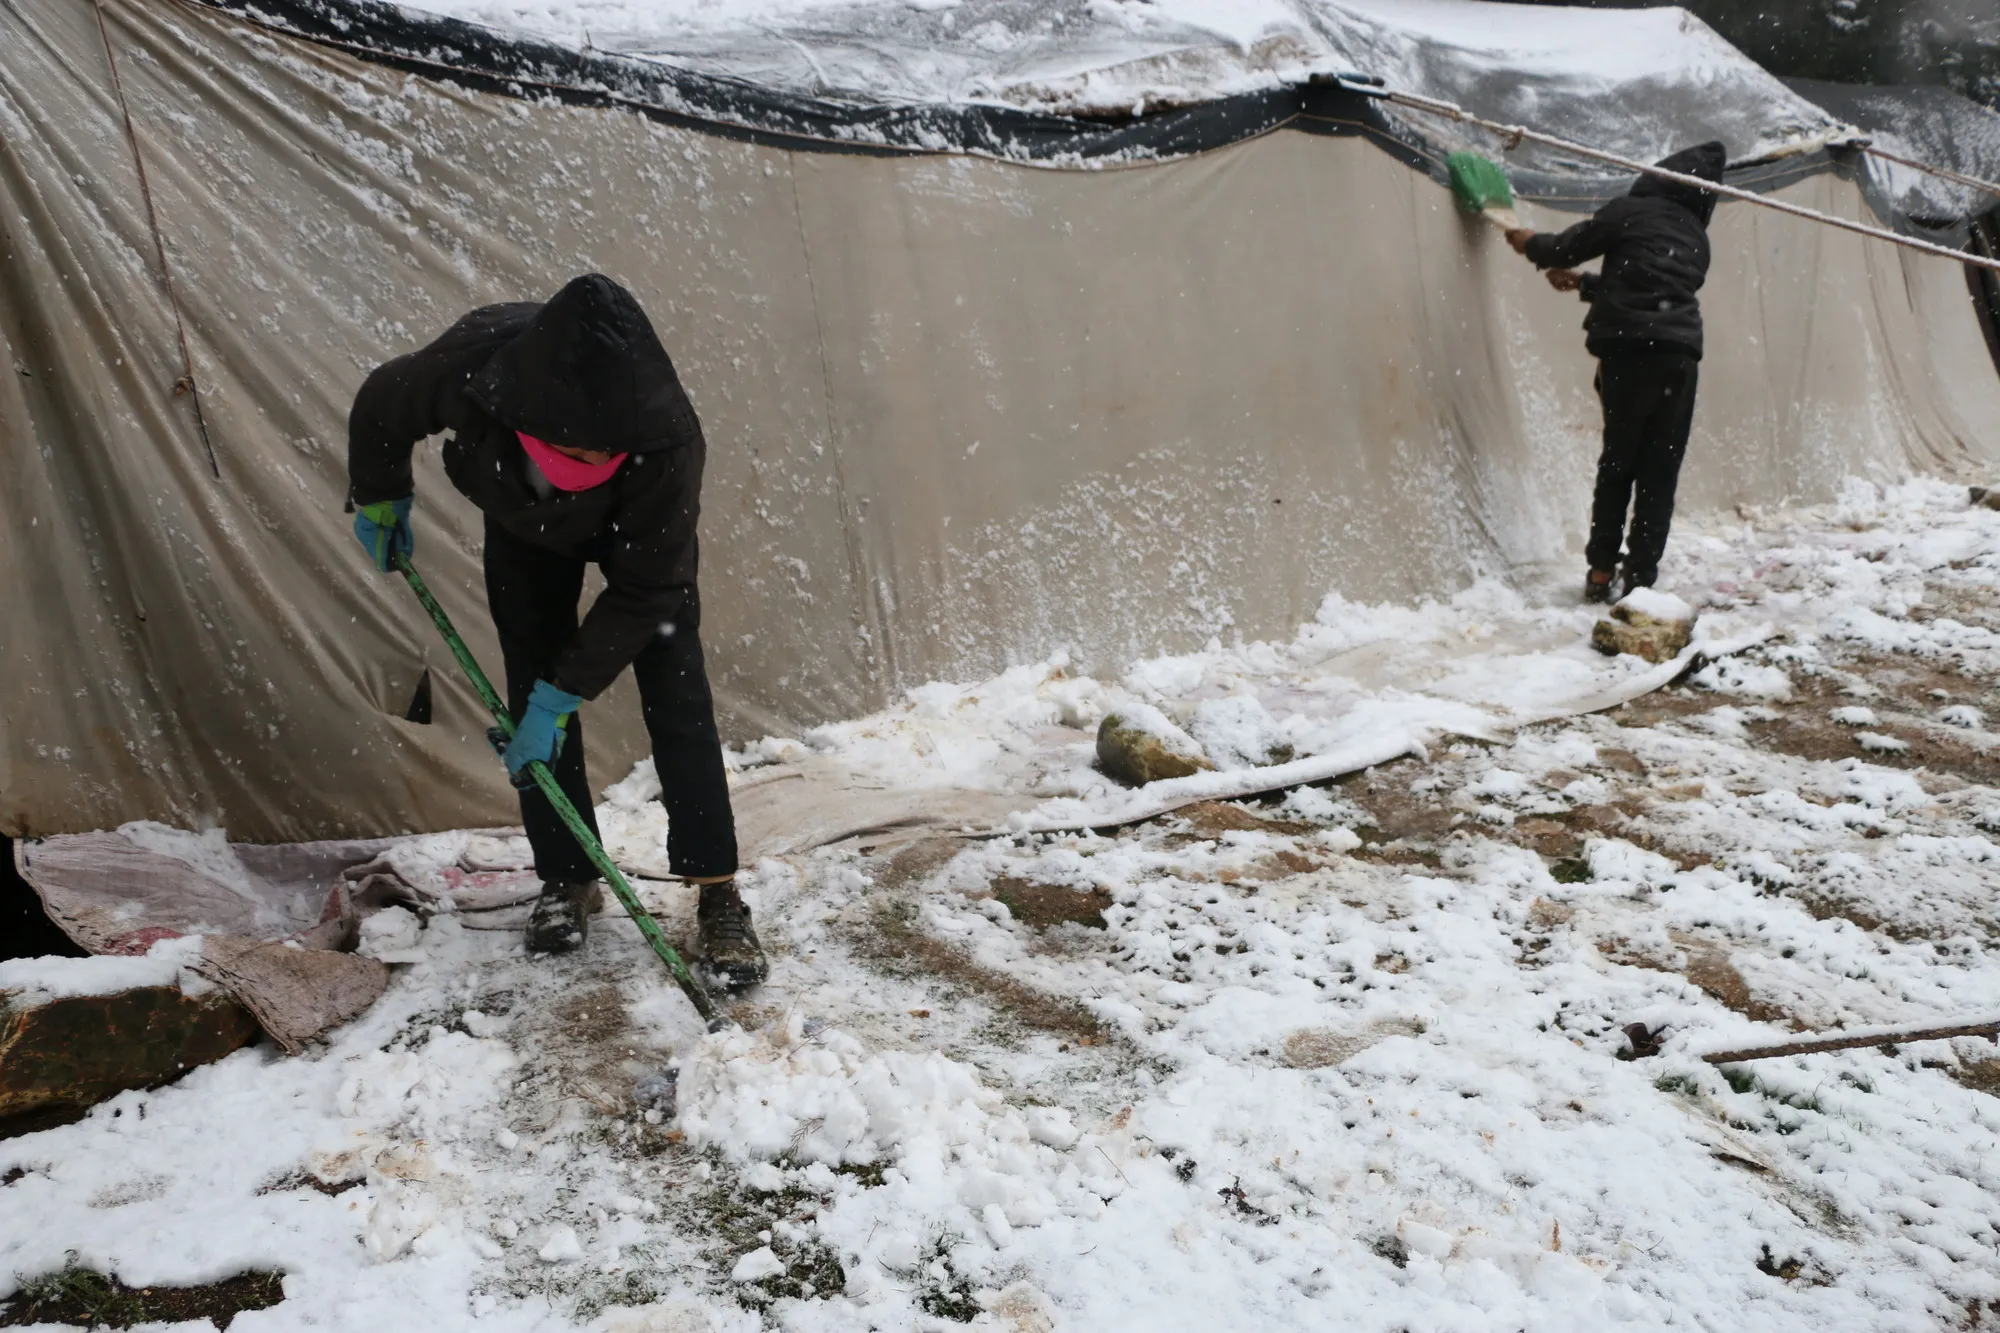 Two children shovel snow outside a tent in a camp.